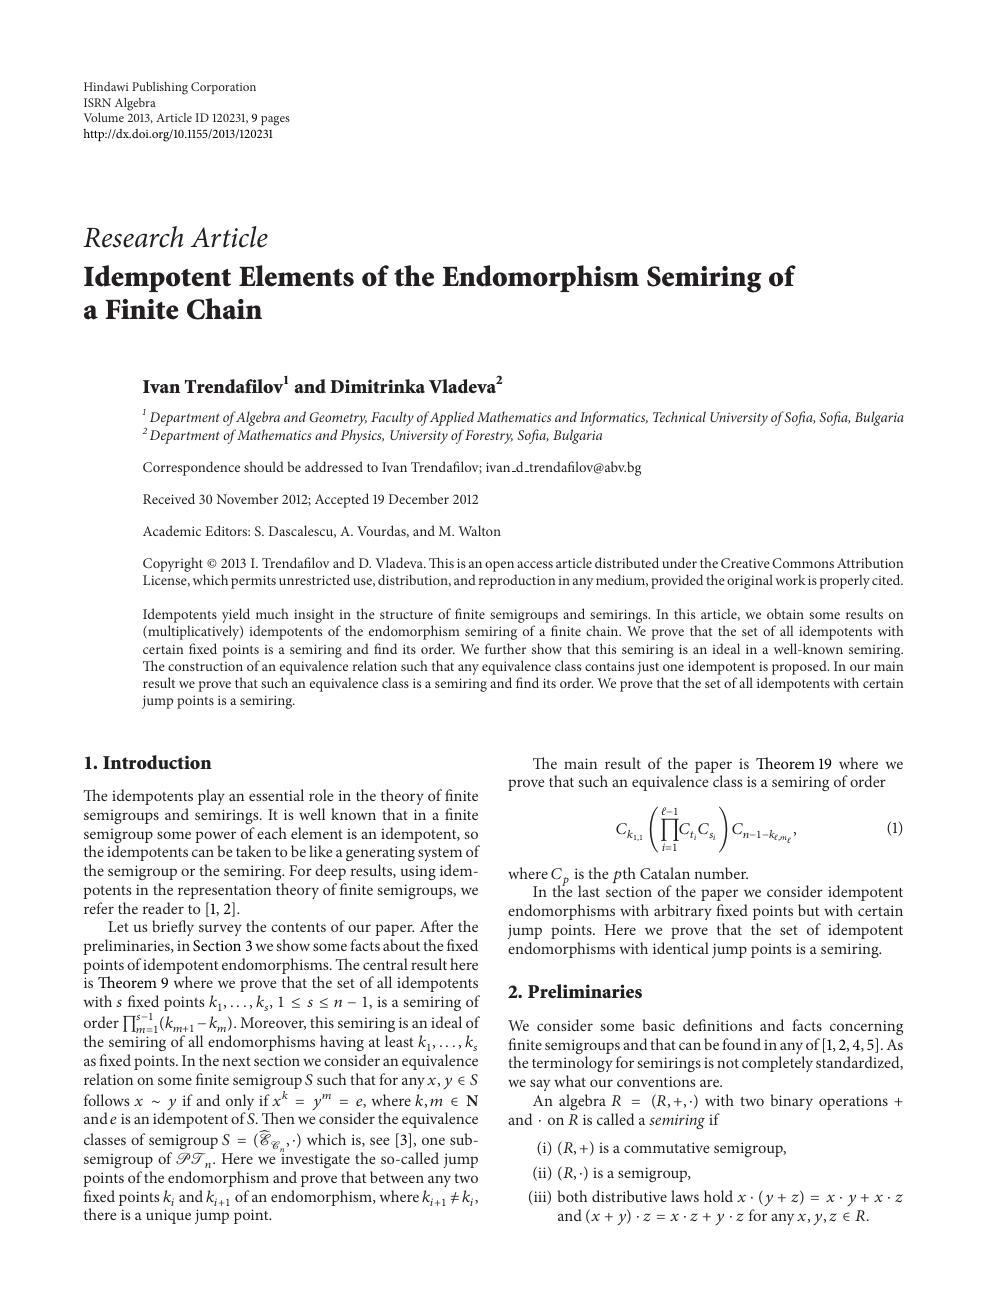 Idempotent Elements Of The Endomorphism Semiring Of A Finite Chain Topic Of Research Paper In Mathematics Download Scholarly Article Pdf And Read For Free On Cyberleninka Open Science Hub